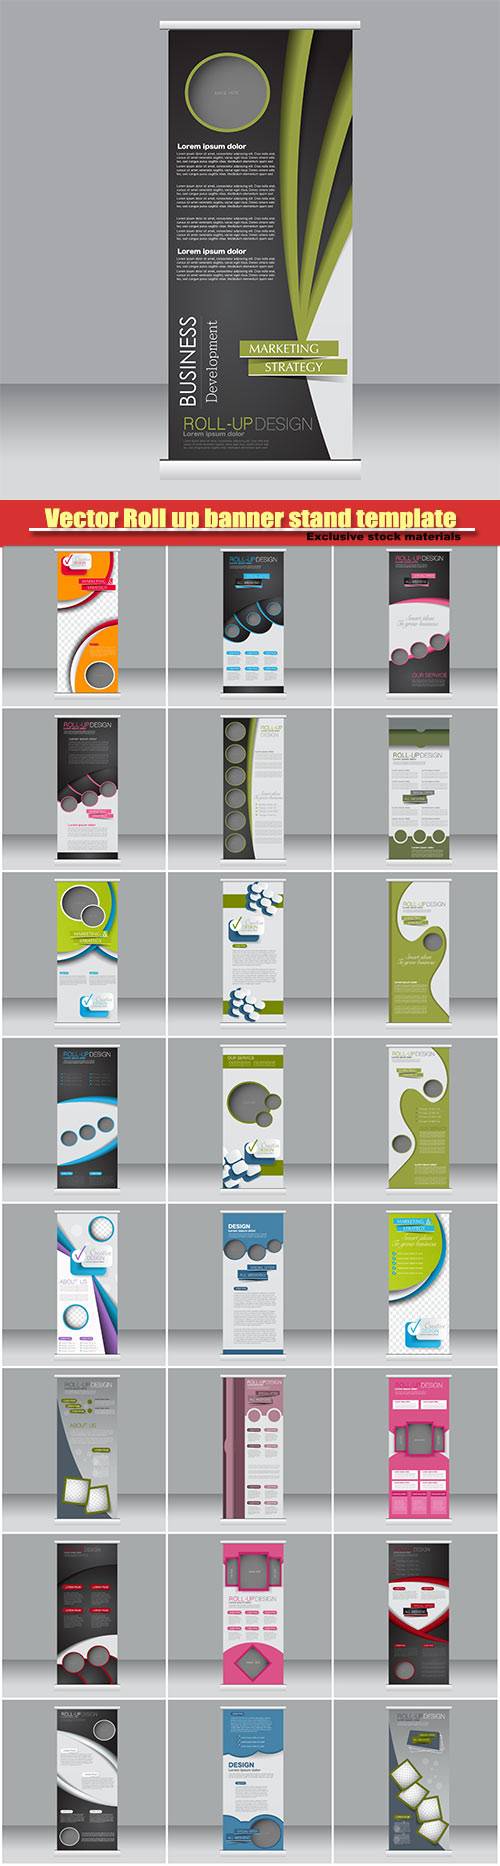 Vector Roll up banner stand template, abstract background for design, business, education, advertisement #3